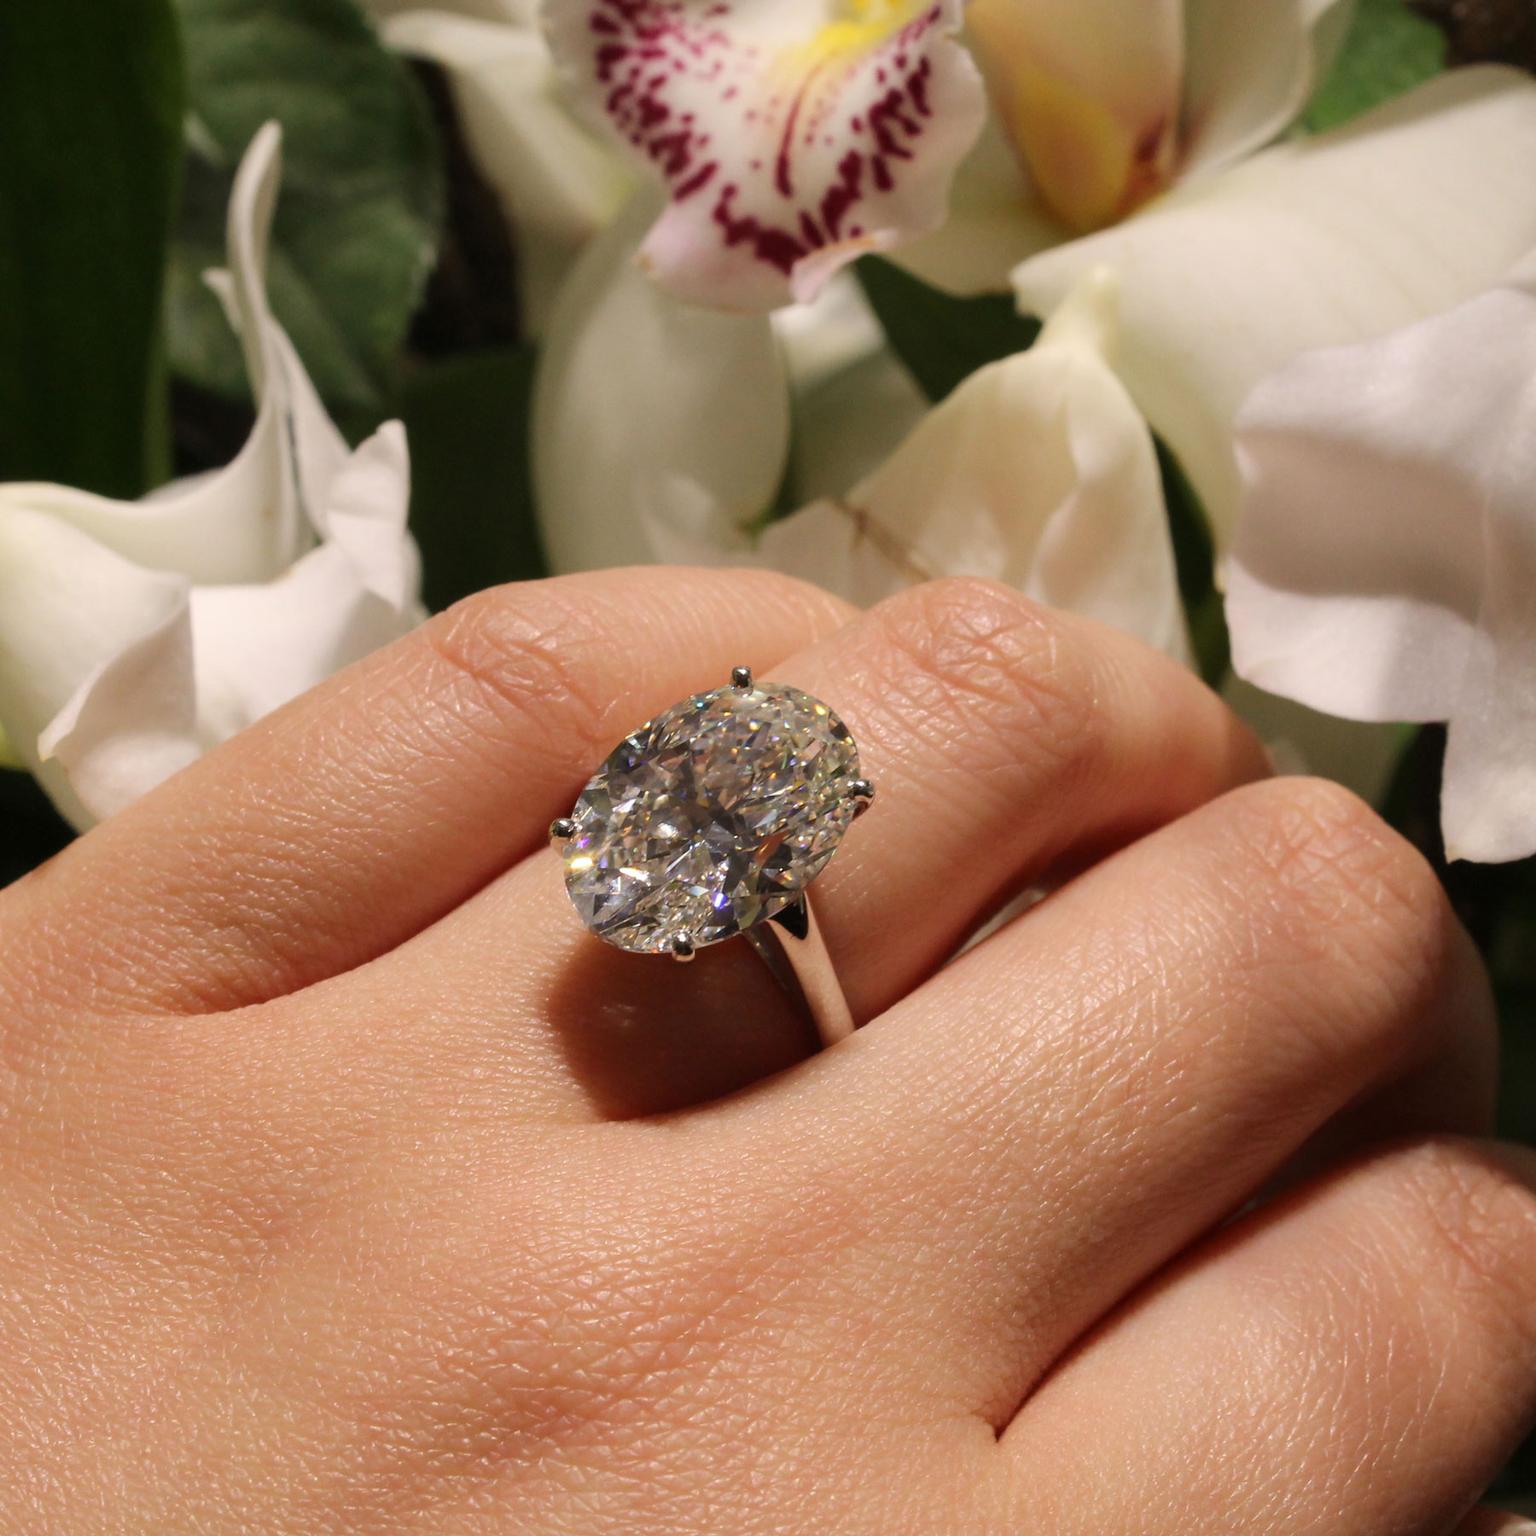 How to choose an engagement ring to 